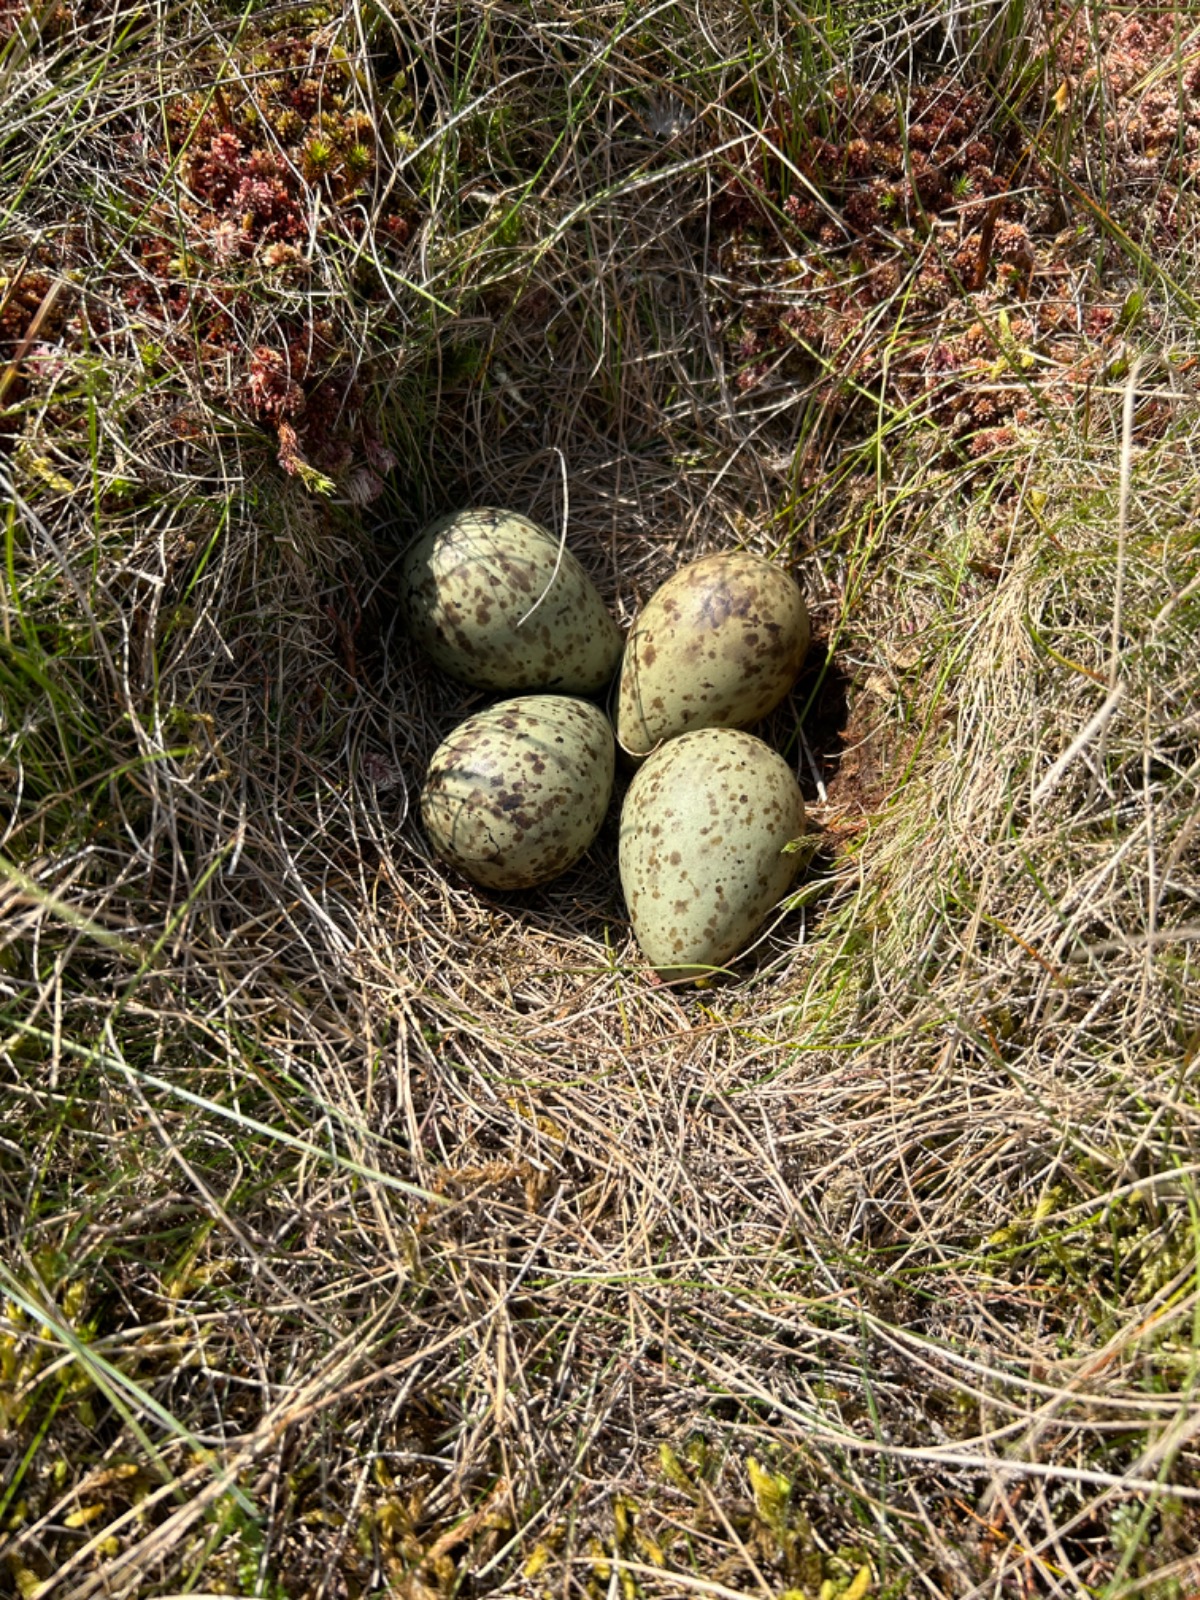 curlew nest